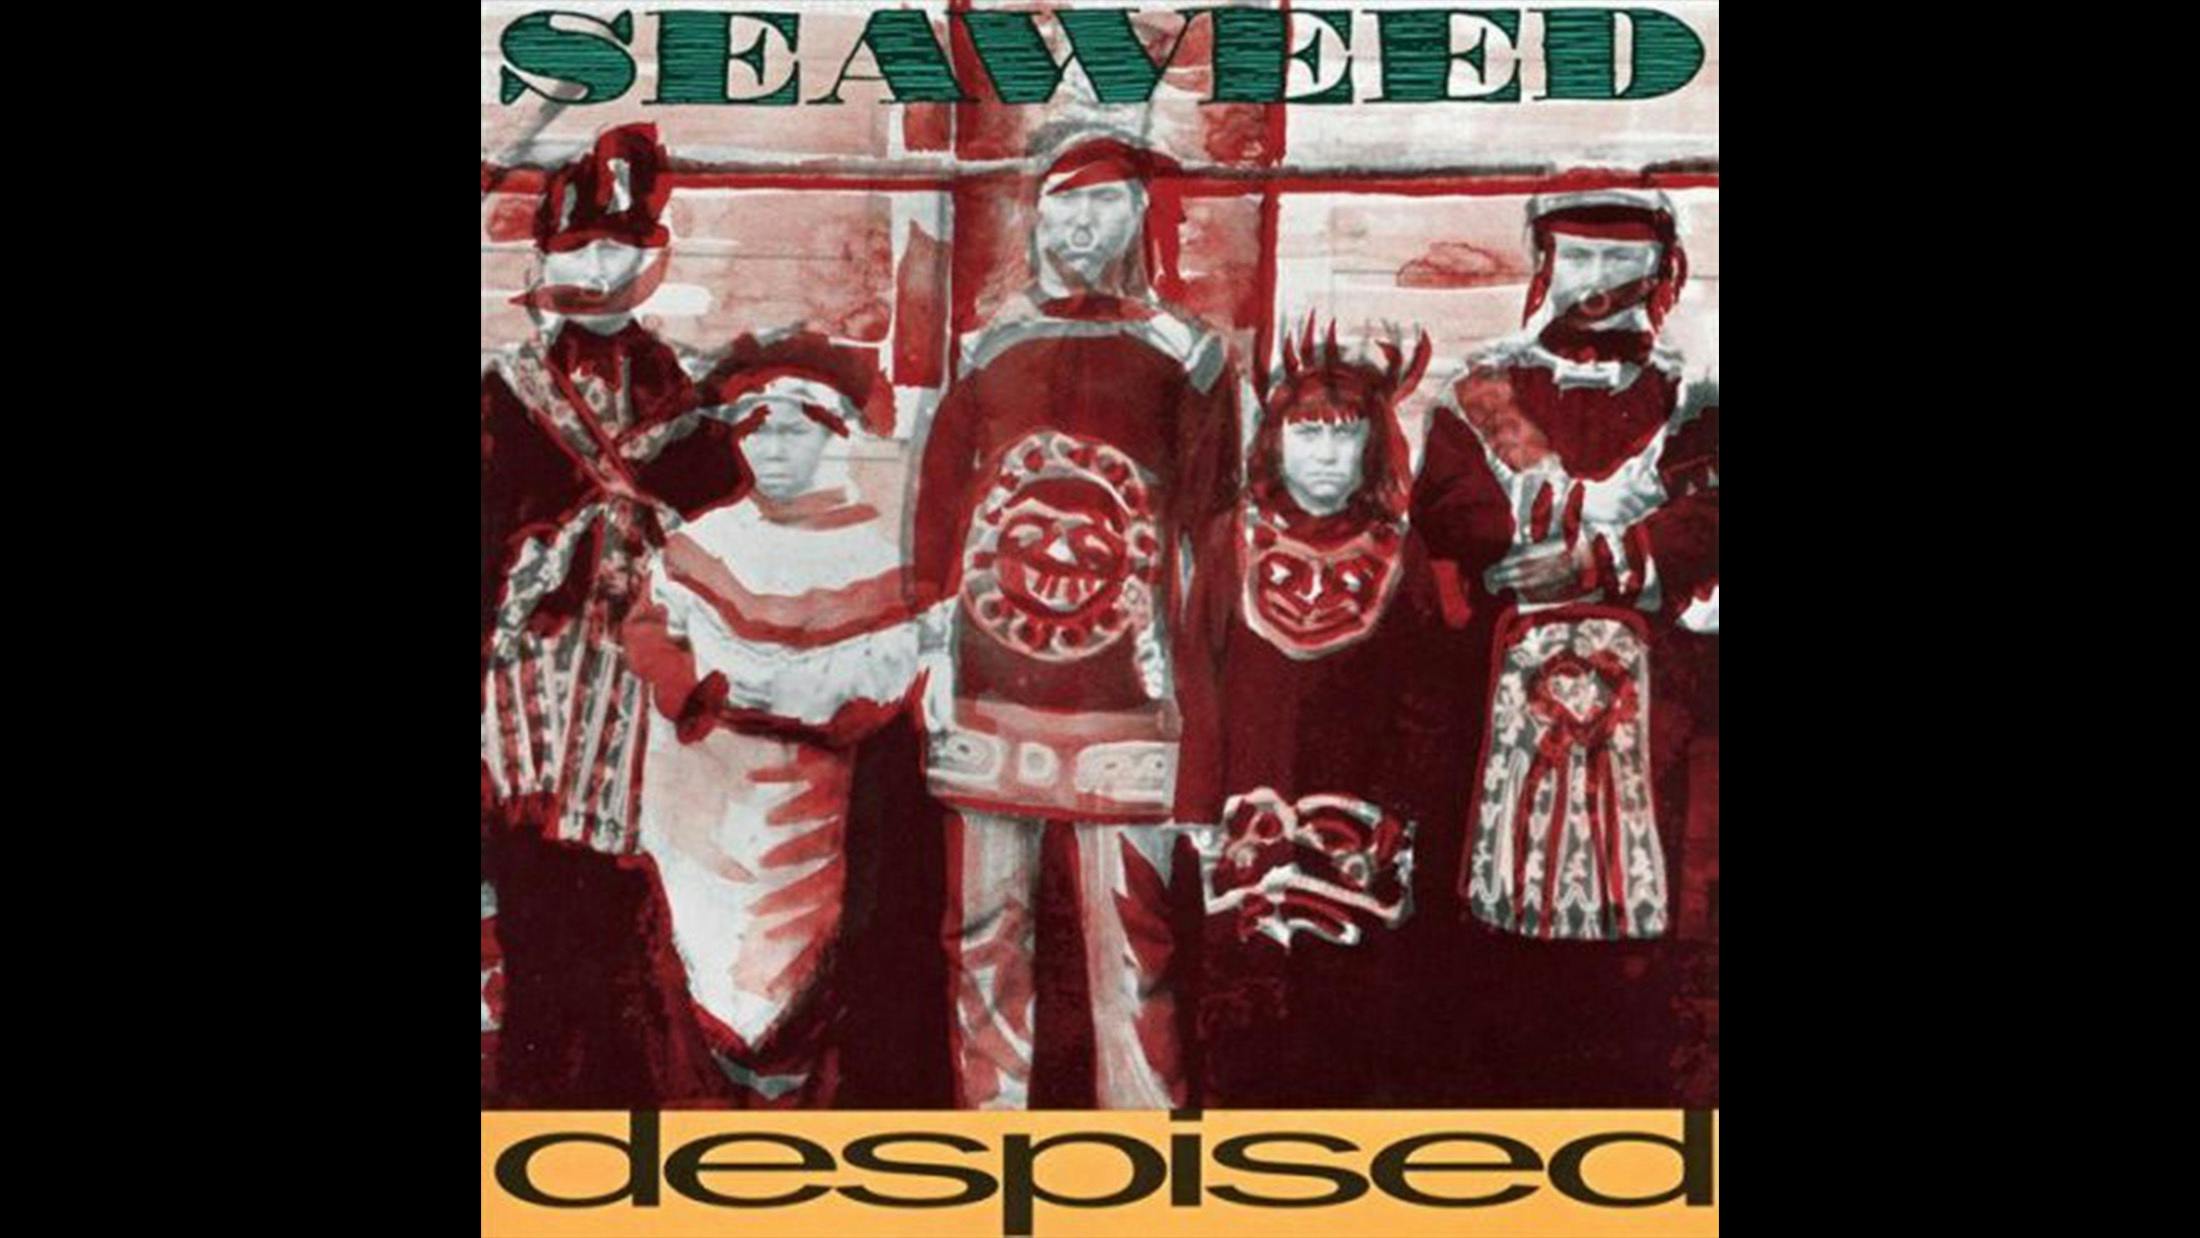 Too punk for grunge and too grunge for punks, Seaweed were one of the most under-appreciated acts to emerge from the late ‘80s North West scene. After a clutch of impressive singles on their own Leopard Gecko label, they signed to Sub Pop and recorded this debut with producer Jack Endino. A spirited affair, Despised delivered 10 tracks of intense melodic joy topped with strong-armed, post-Hüsker Dü riffing, Seaweed would argue that they improved on this effort, but this album retains all of its naïve charm.